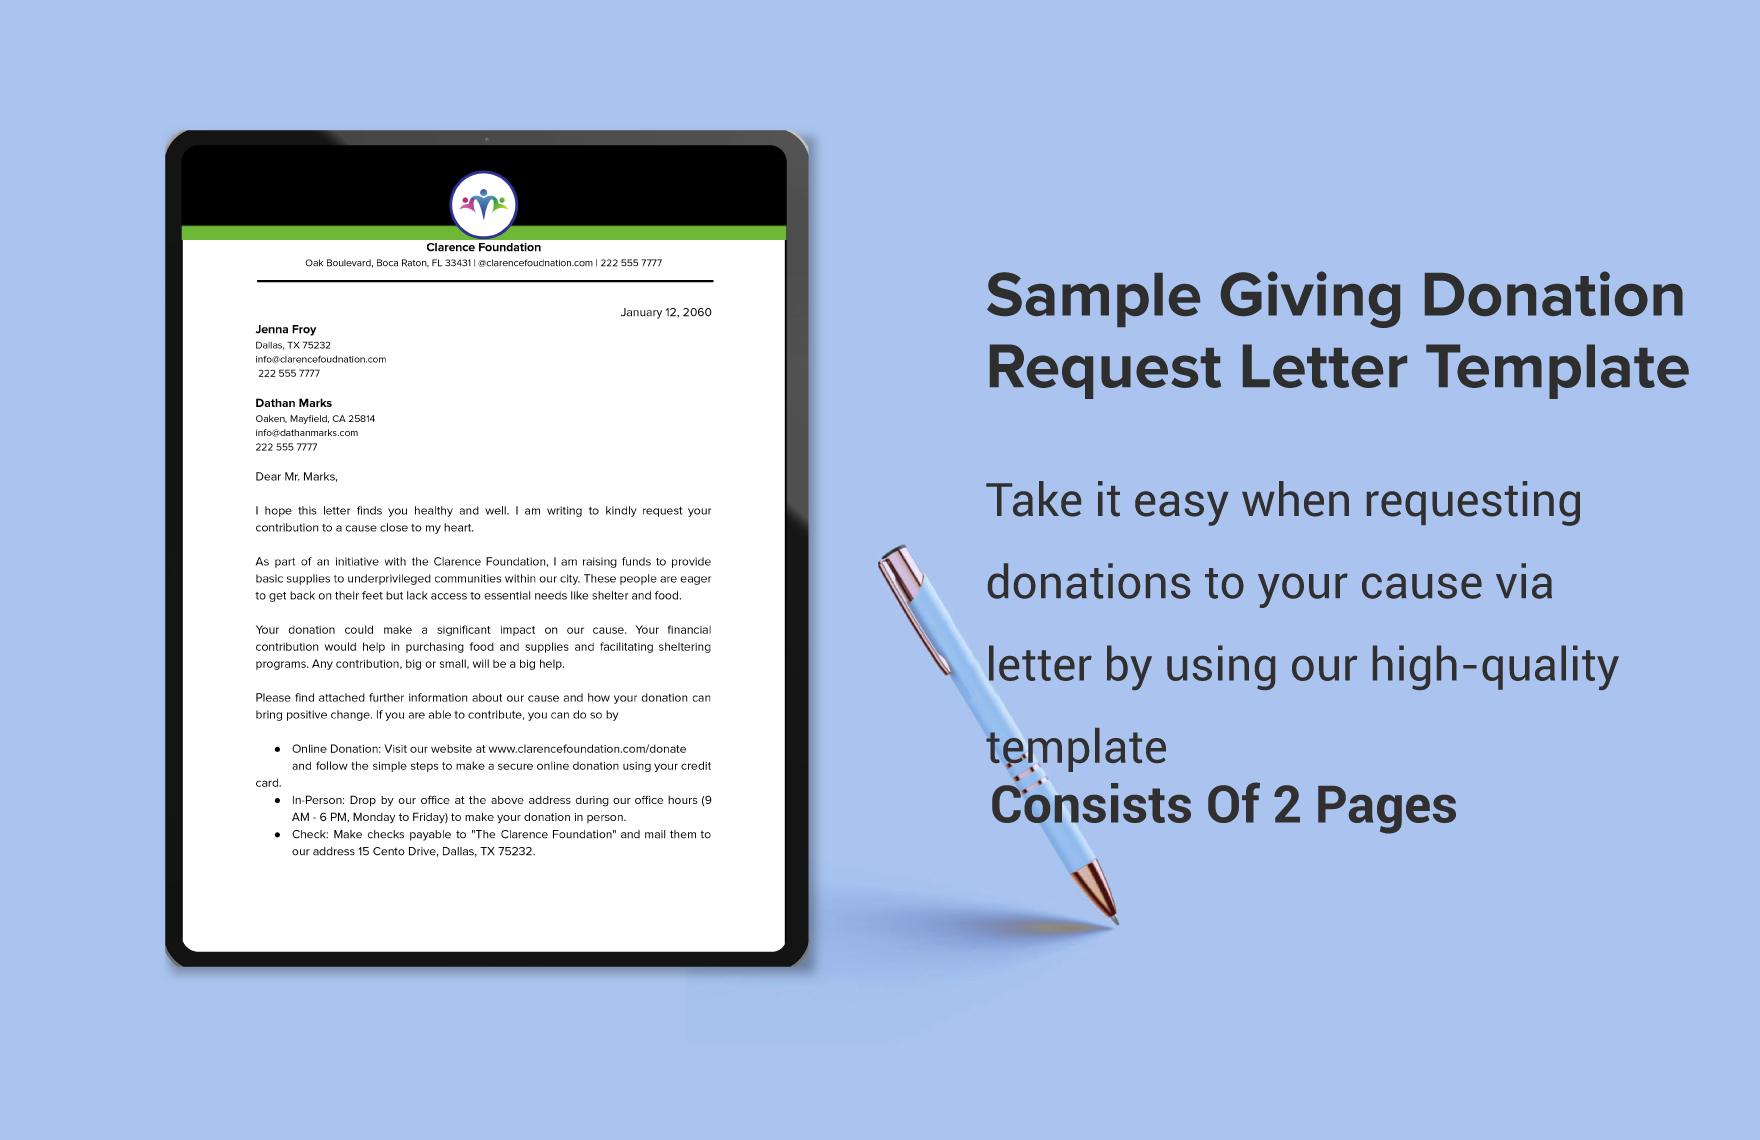 Sample Giving Donation Request Letter Template